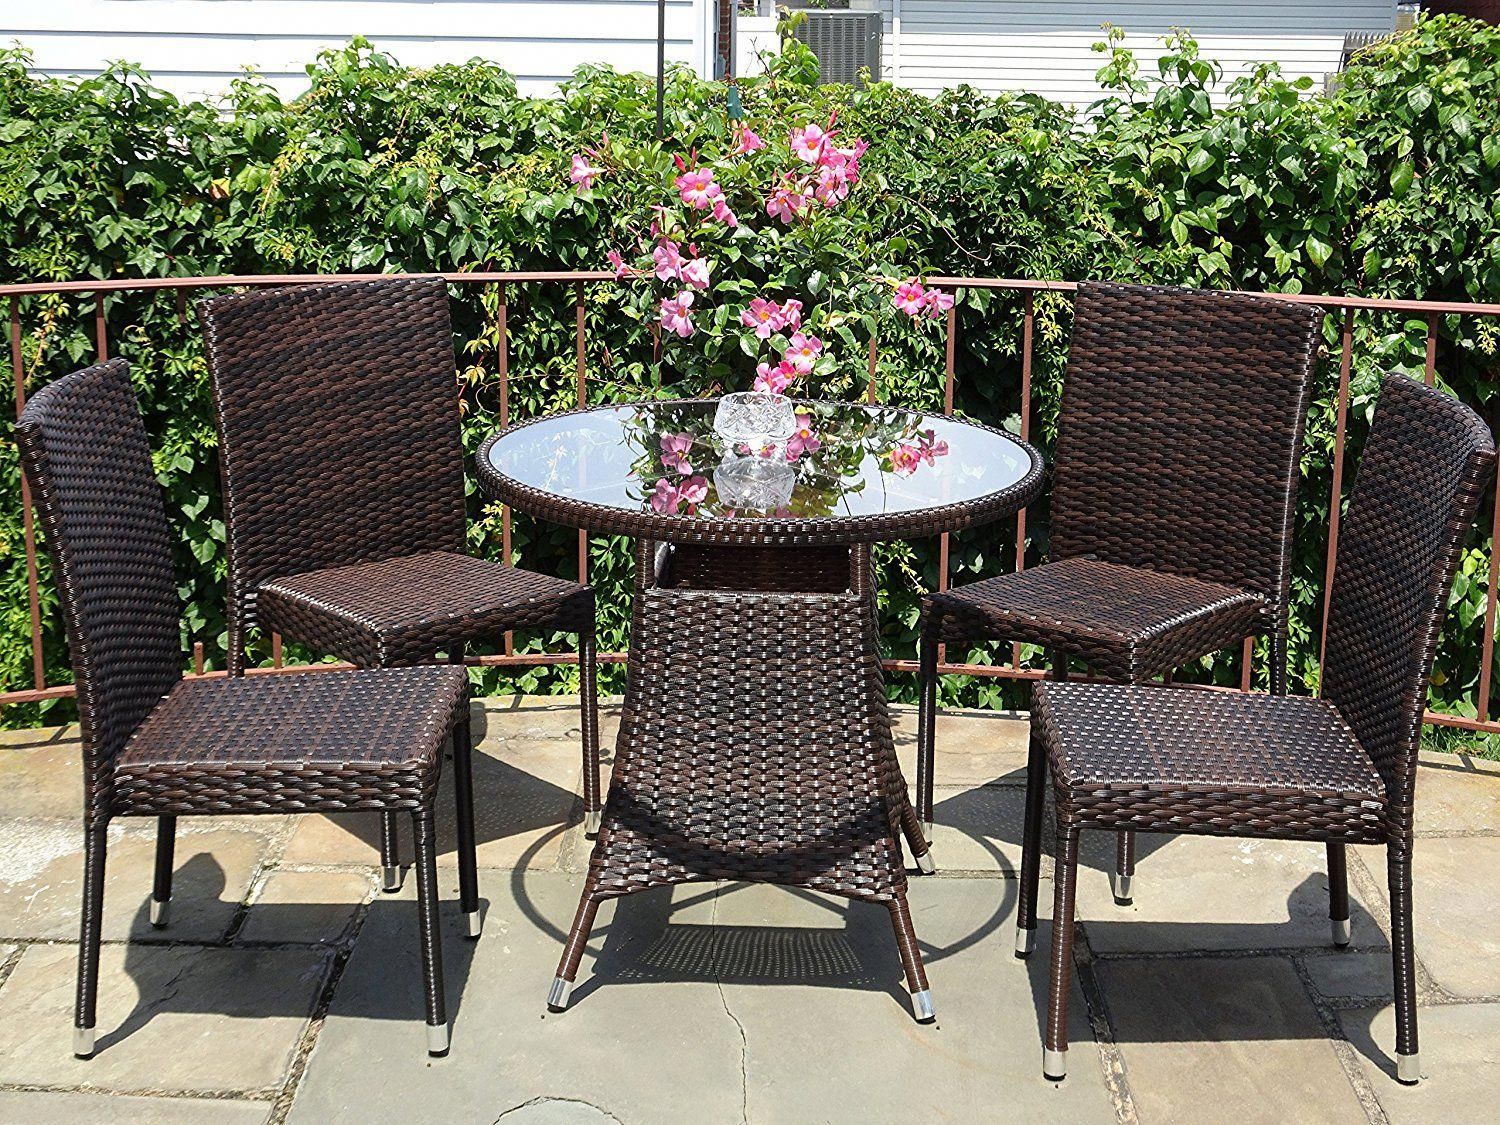 furnitures patio resin outdoor wicker dining set round table side brown with glass chair dark color the unique antique rod iron night lamp pottery barn furniture dale tiffany